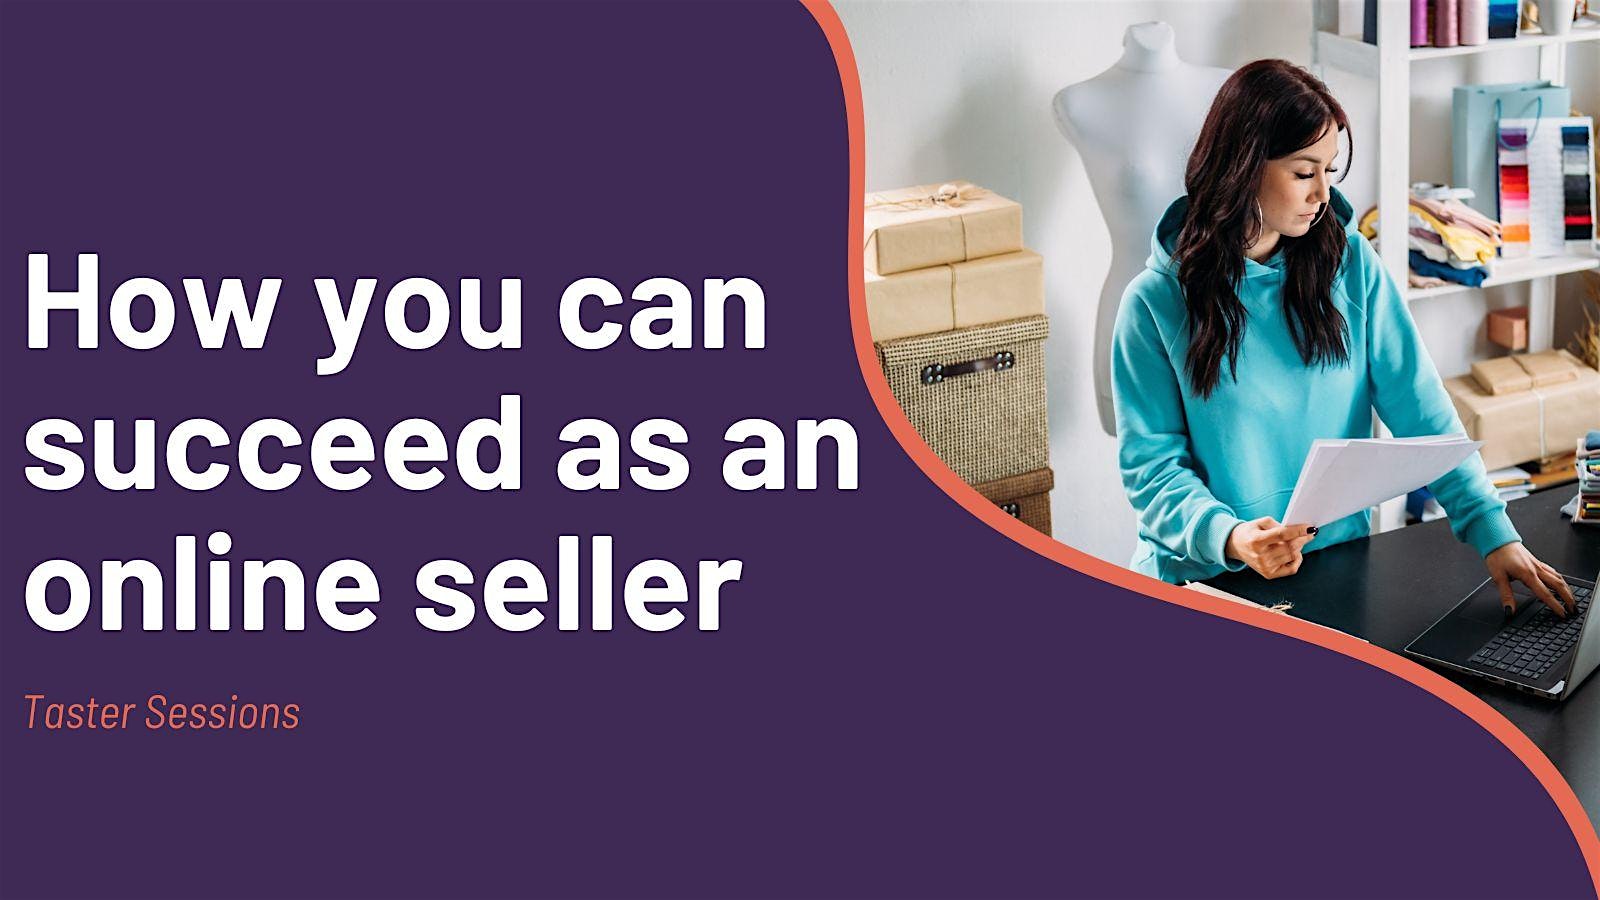 Taster Sessions: How you can succeed as an online seller (Innerleithen) image